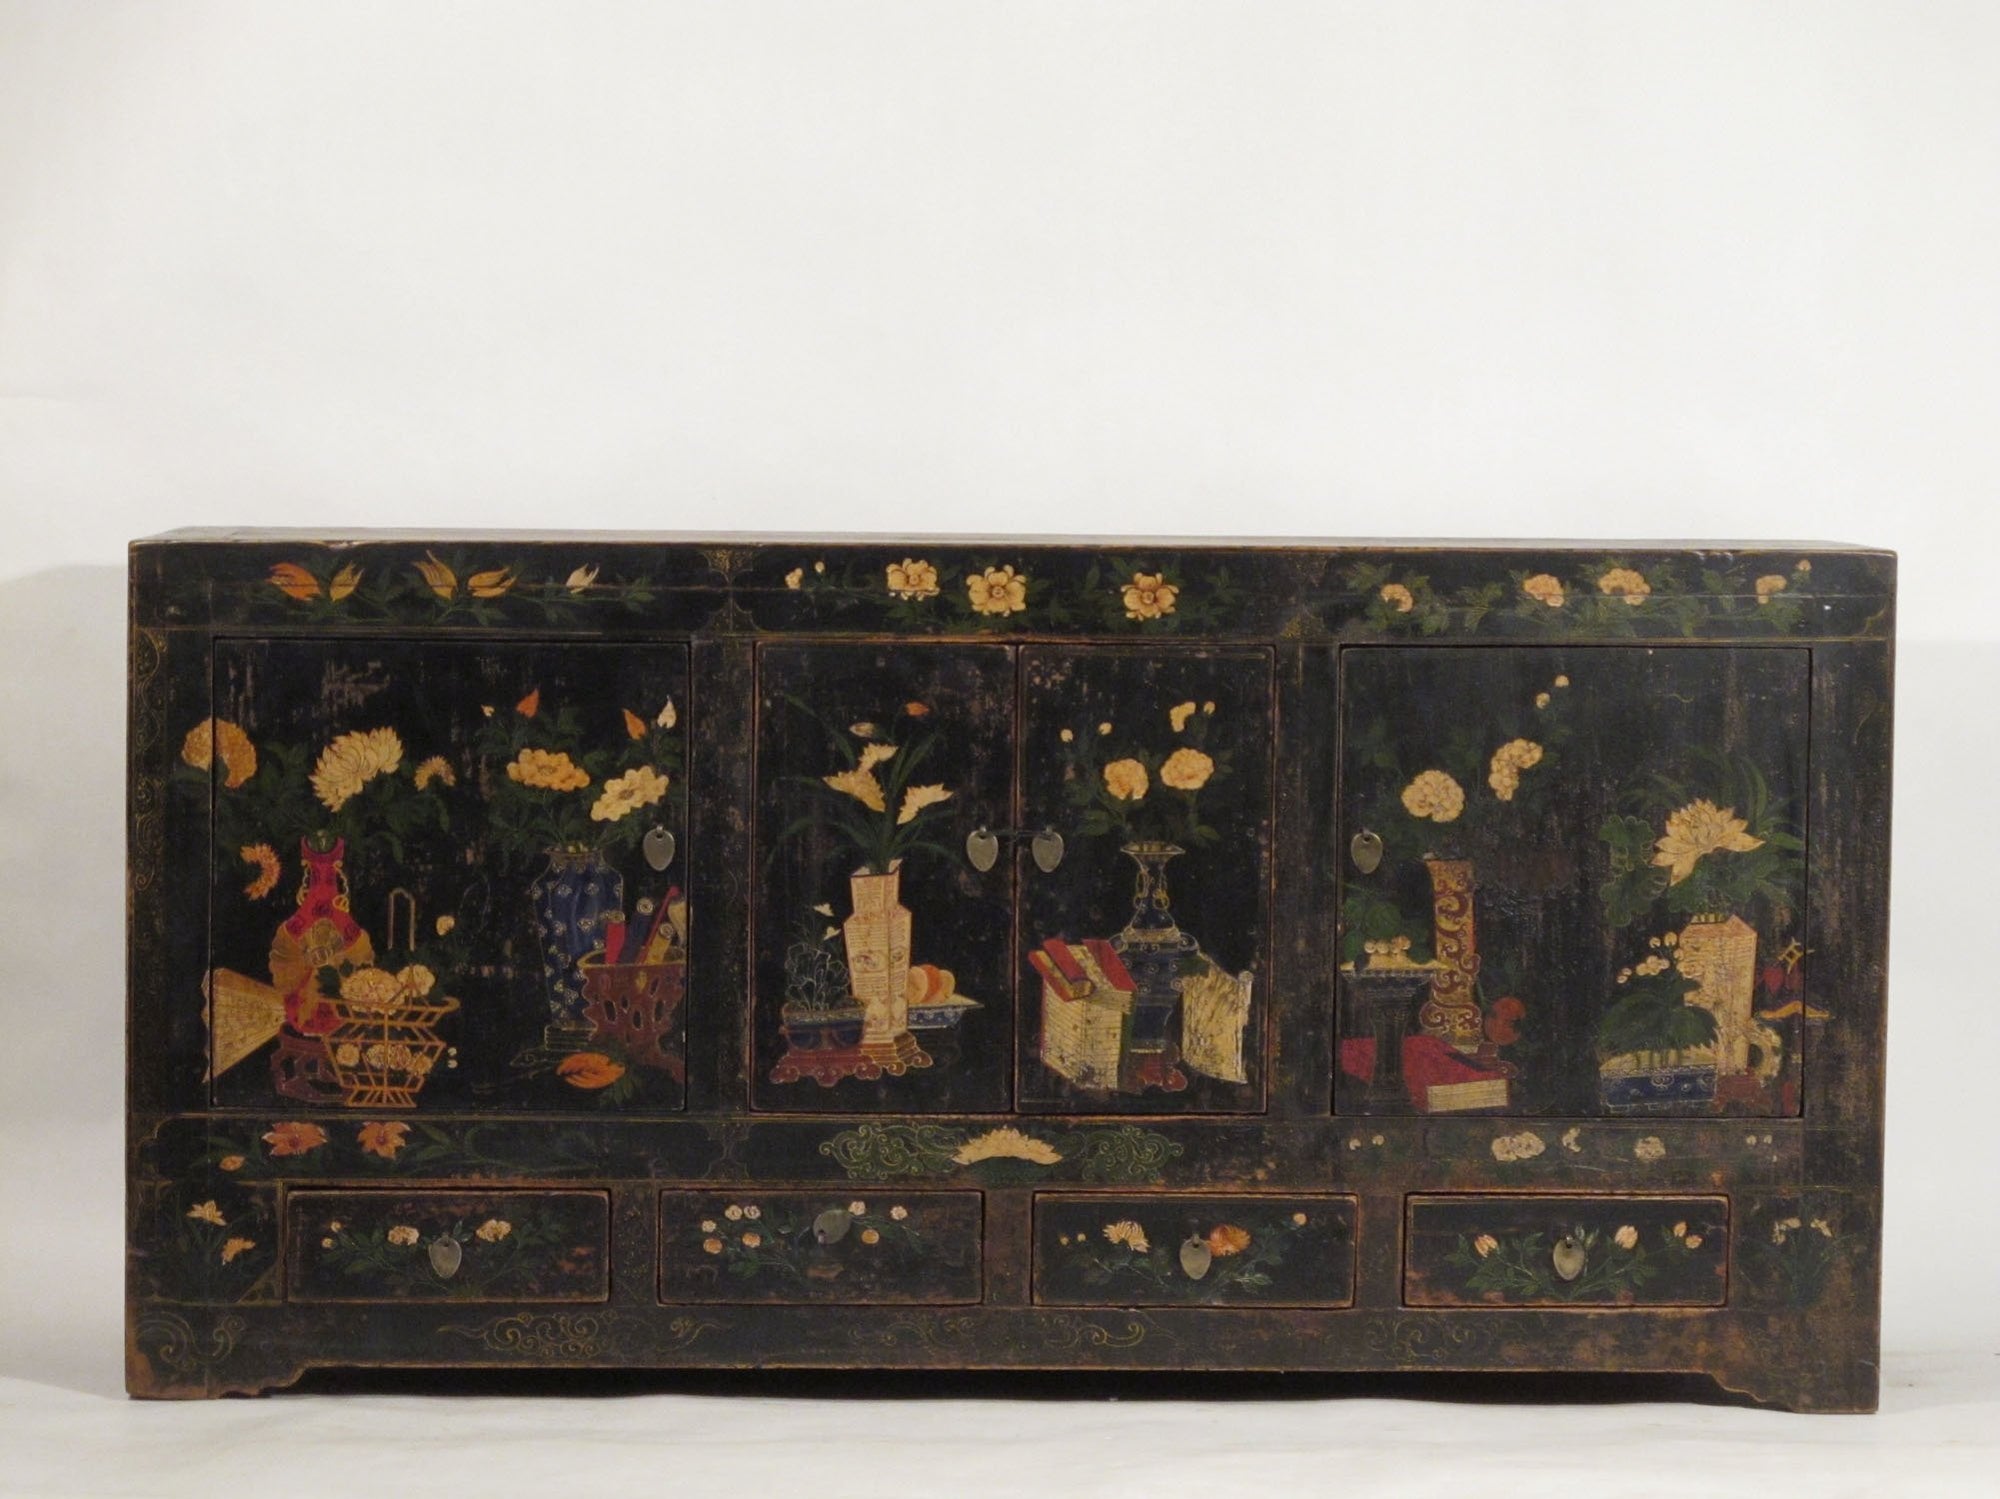 Painted Sideboard From Mongolia - 19thC | Indigo Oriental Antiques